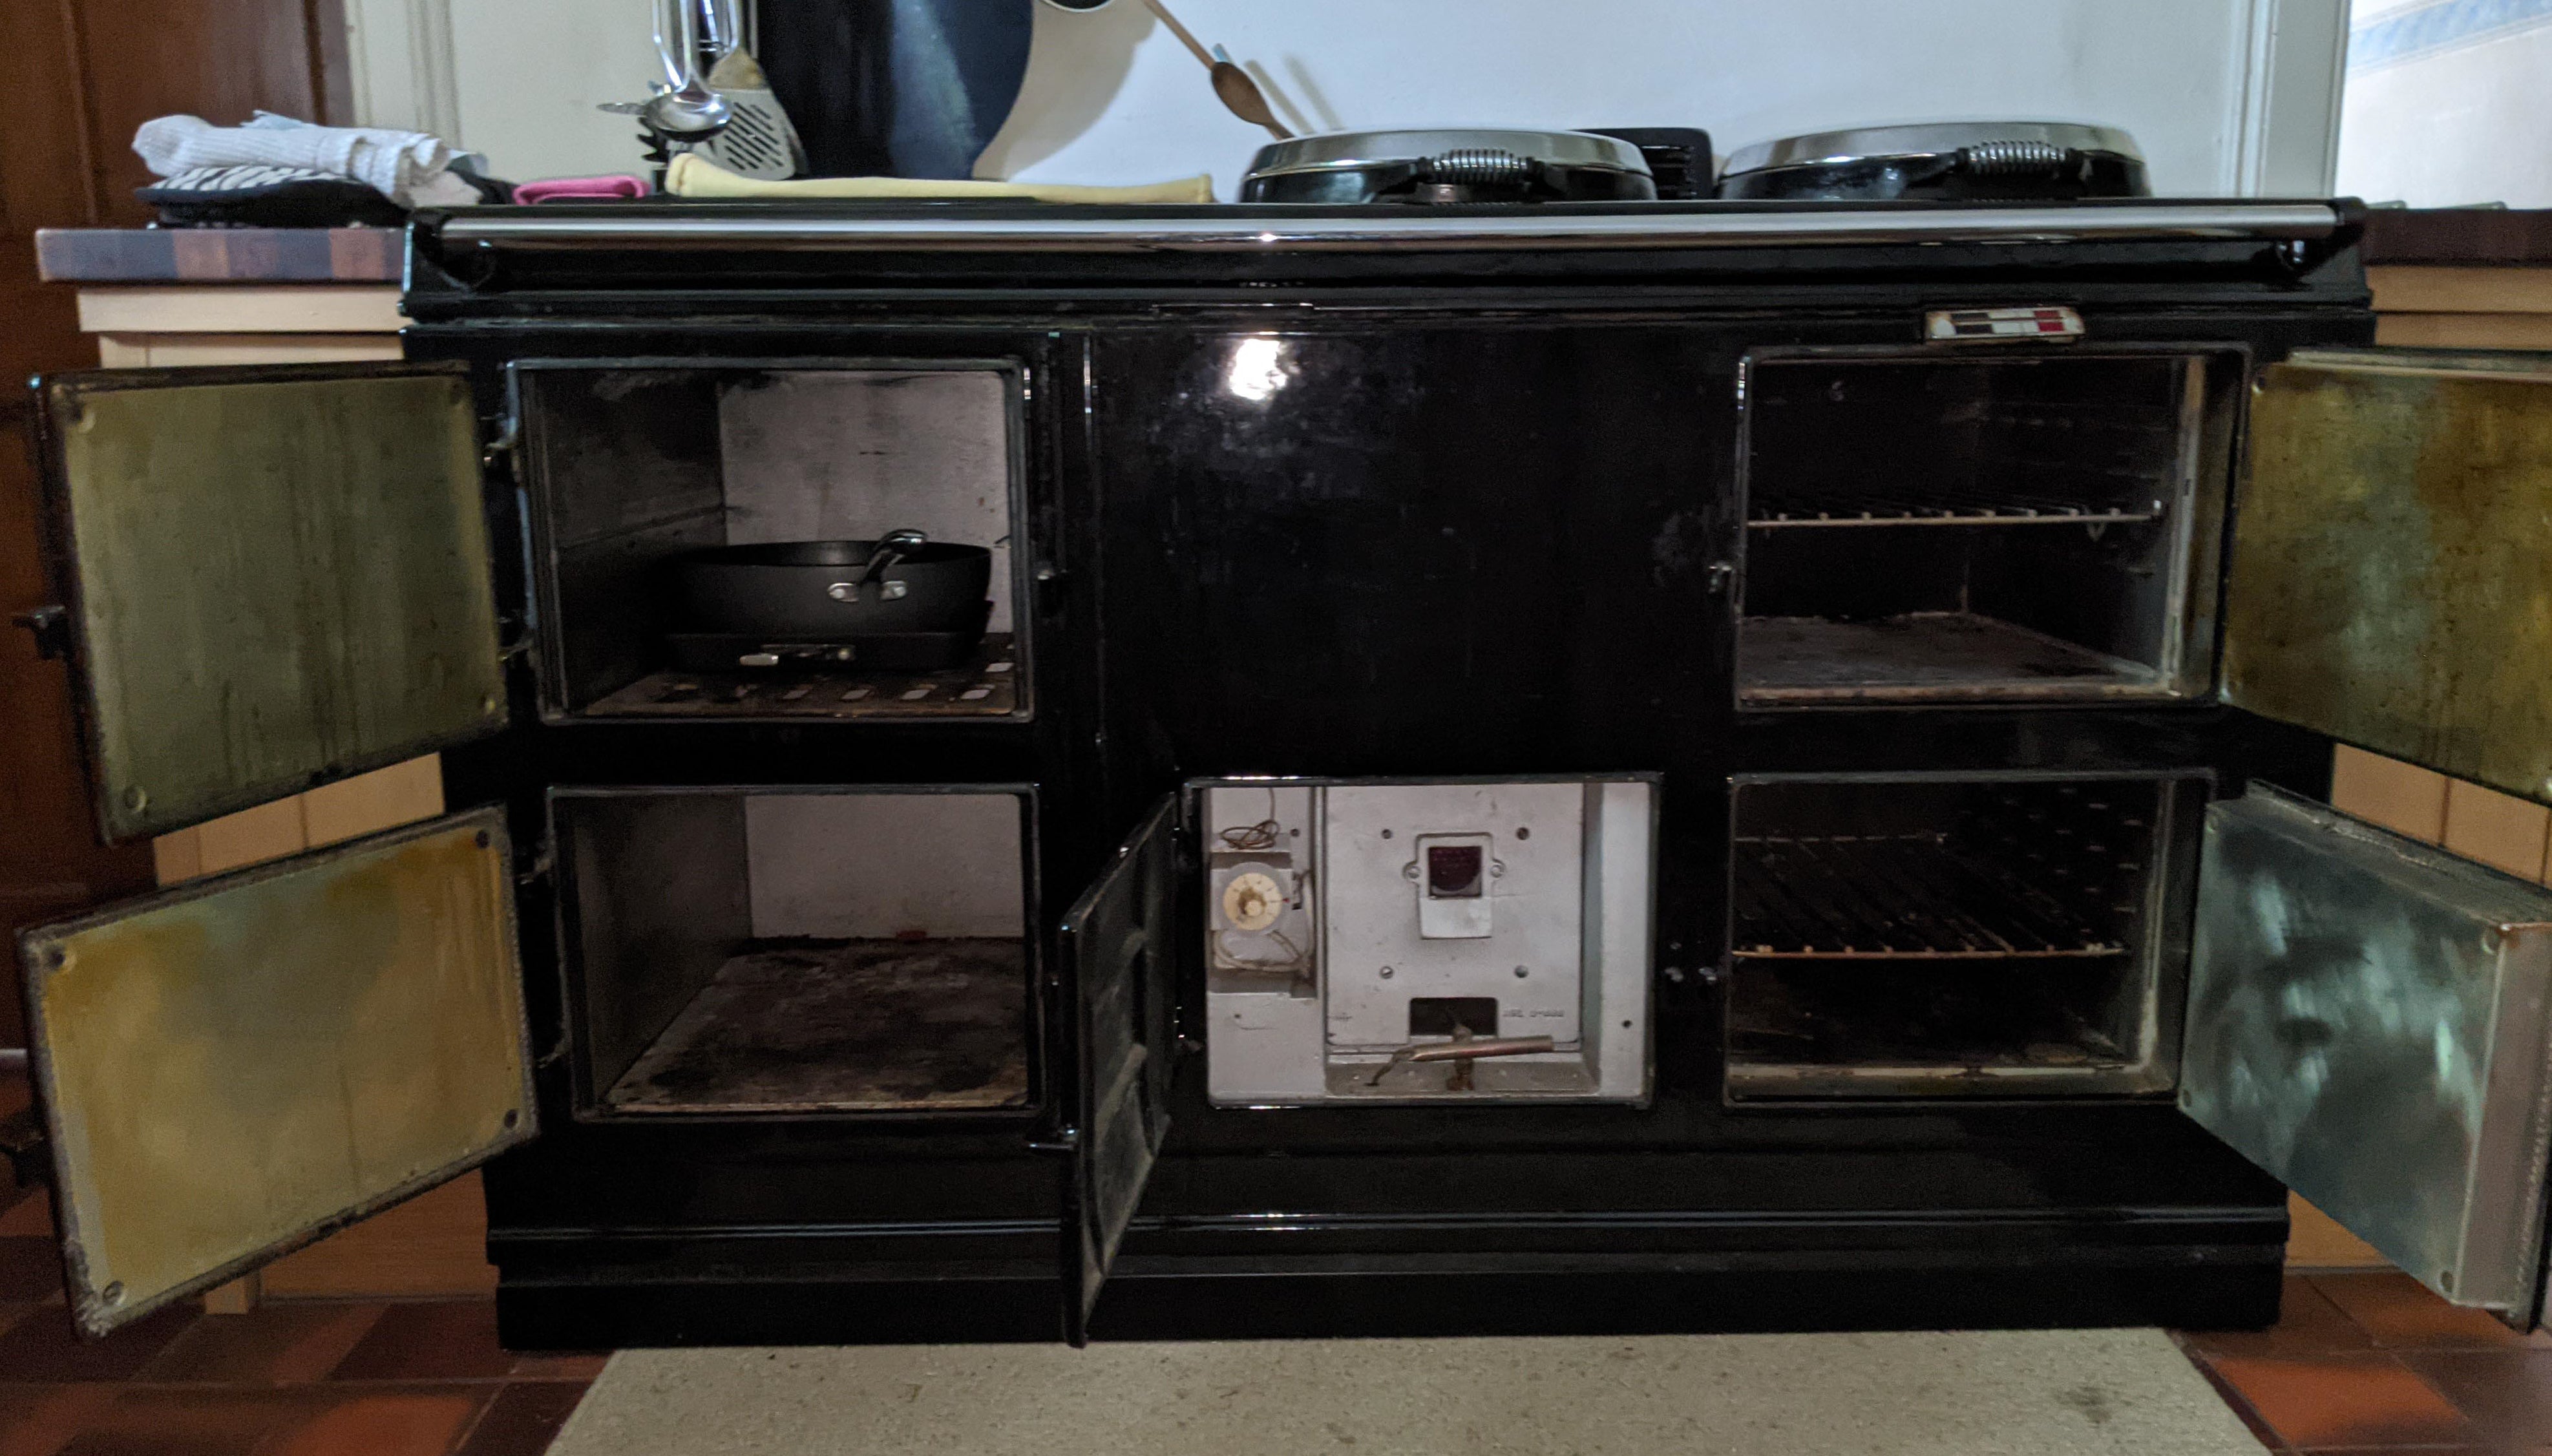 black 4 oven aga range cooker before refurb and conversion